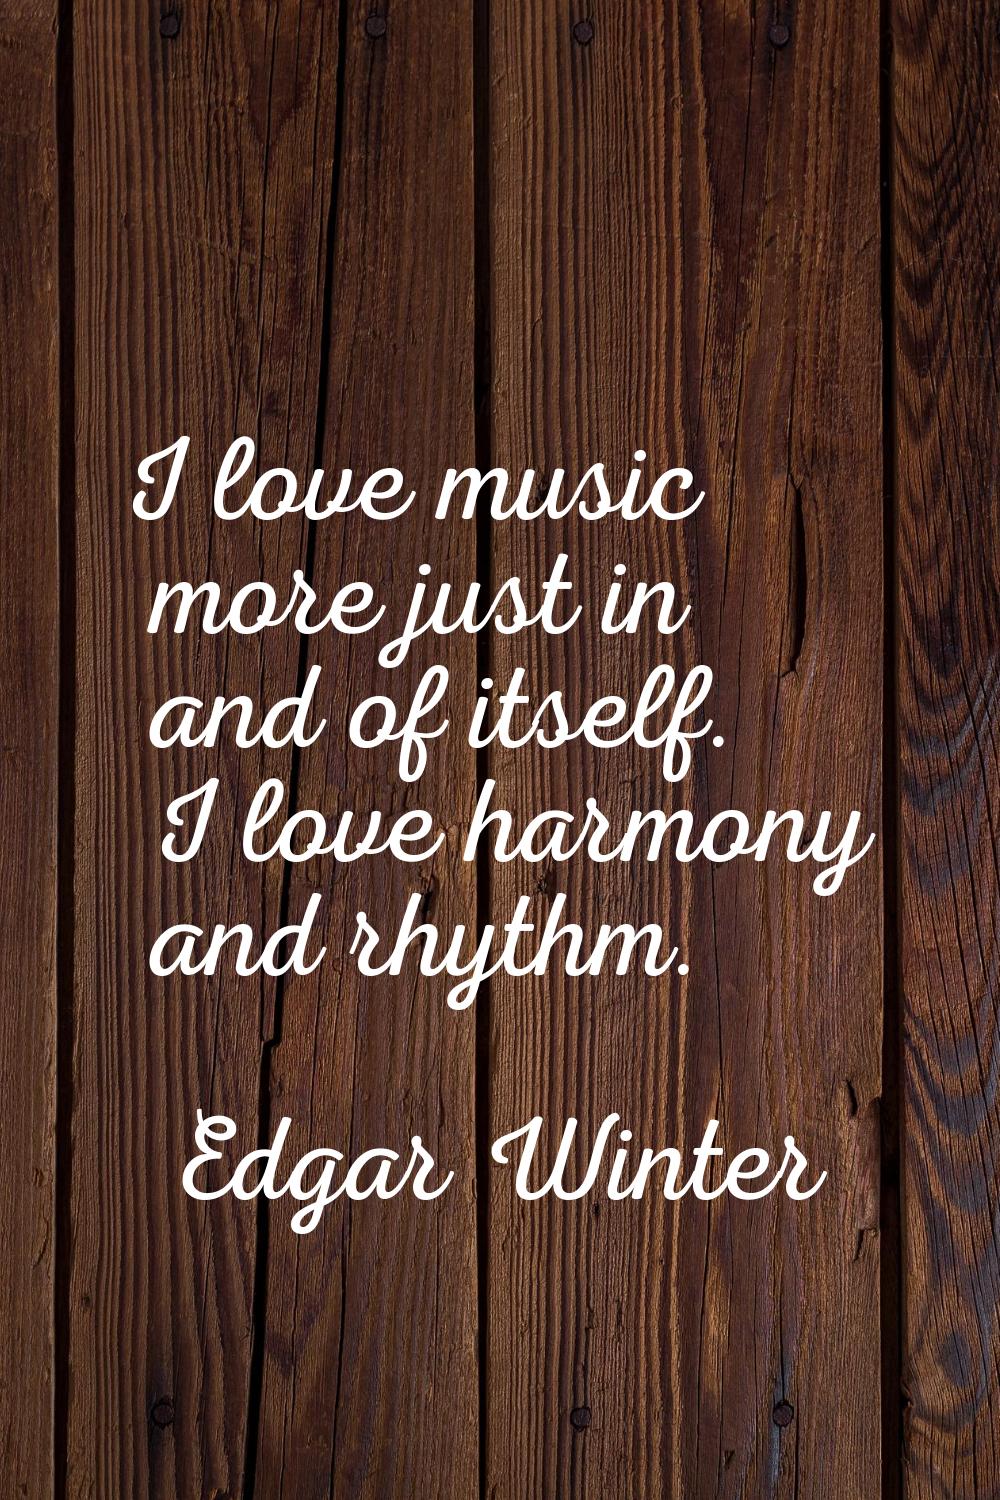 I love music more just in and of itself. I love harmony and rhythm.